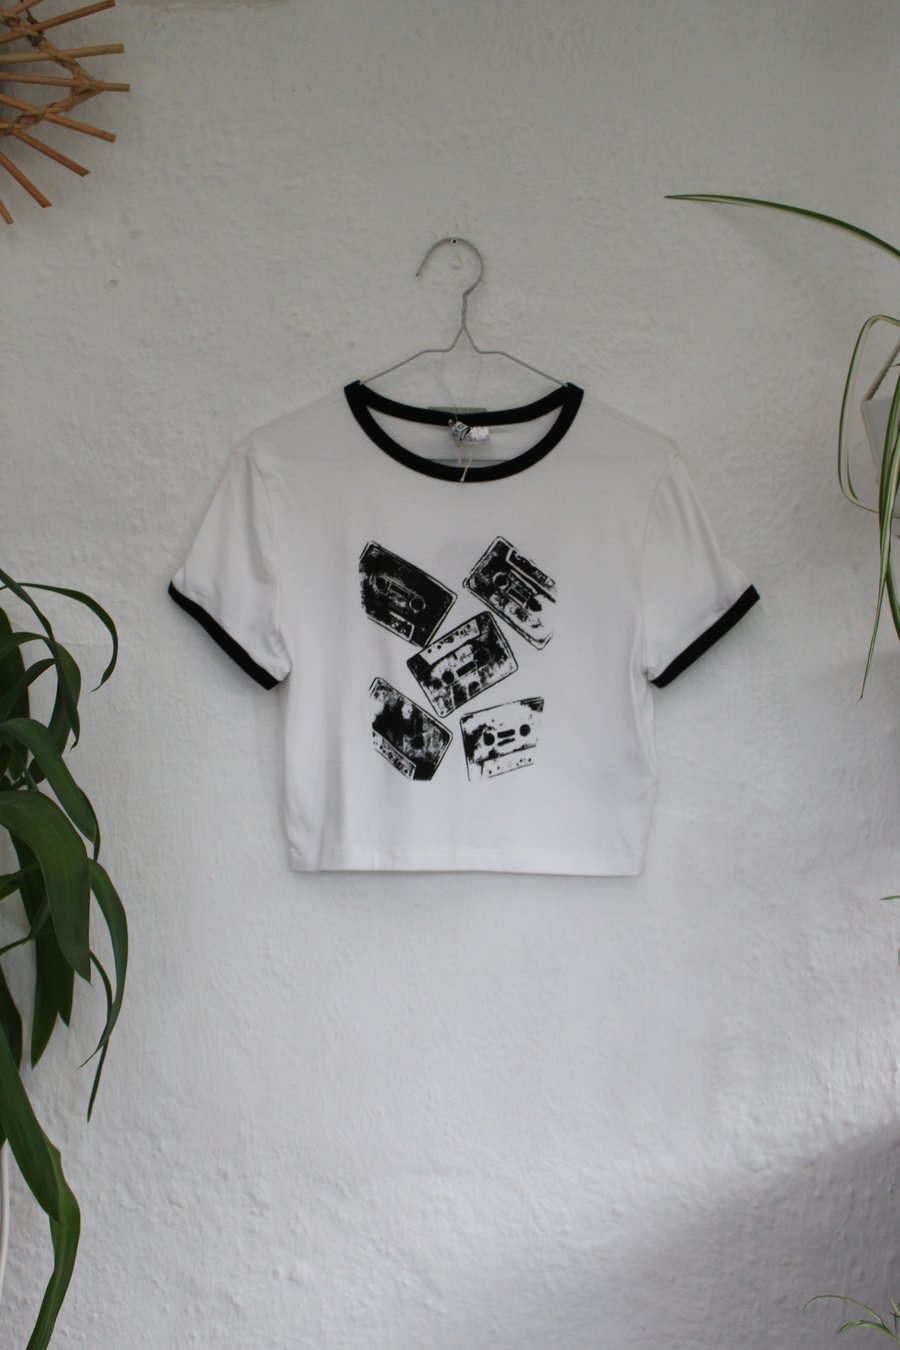 Ladies size L cropped T shirt, reworked Eco clothing, retro tape cassette print